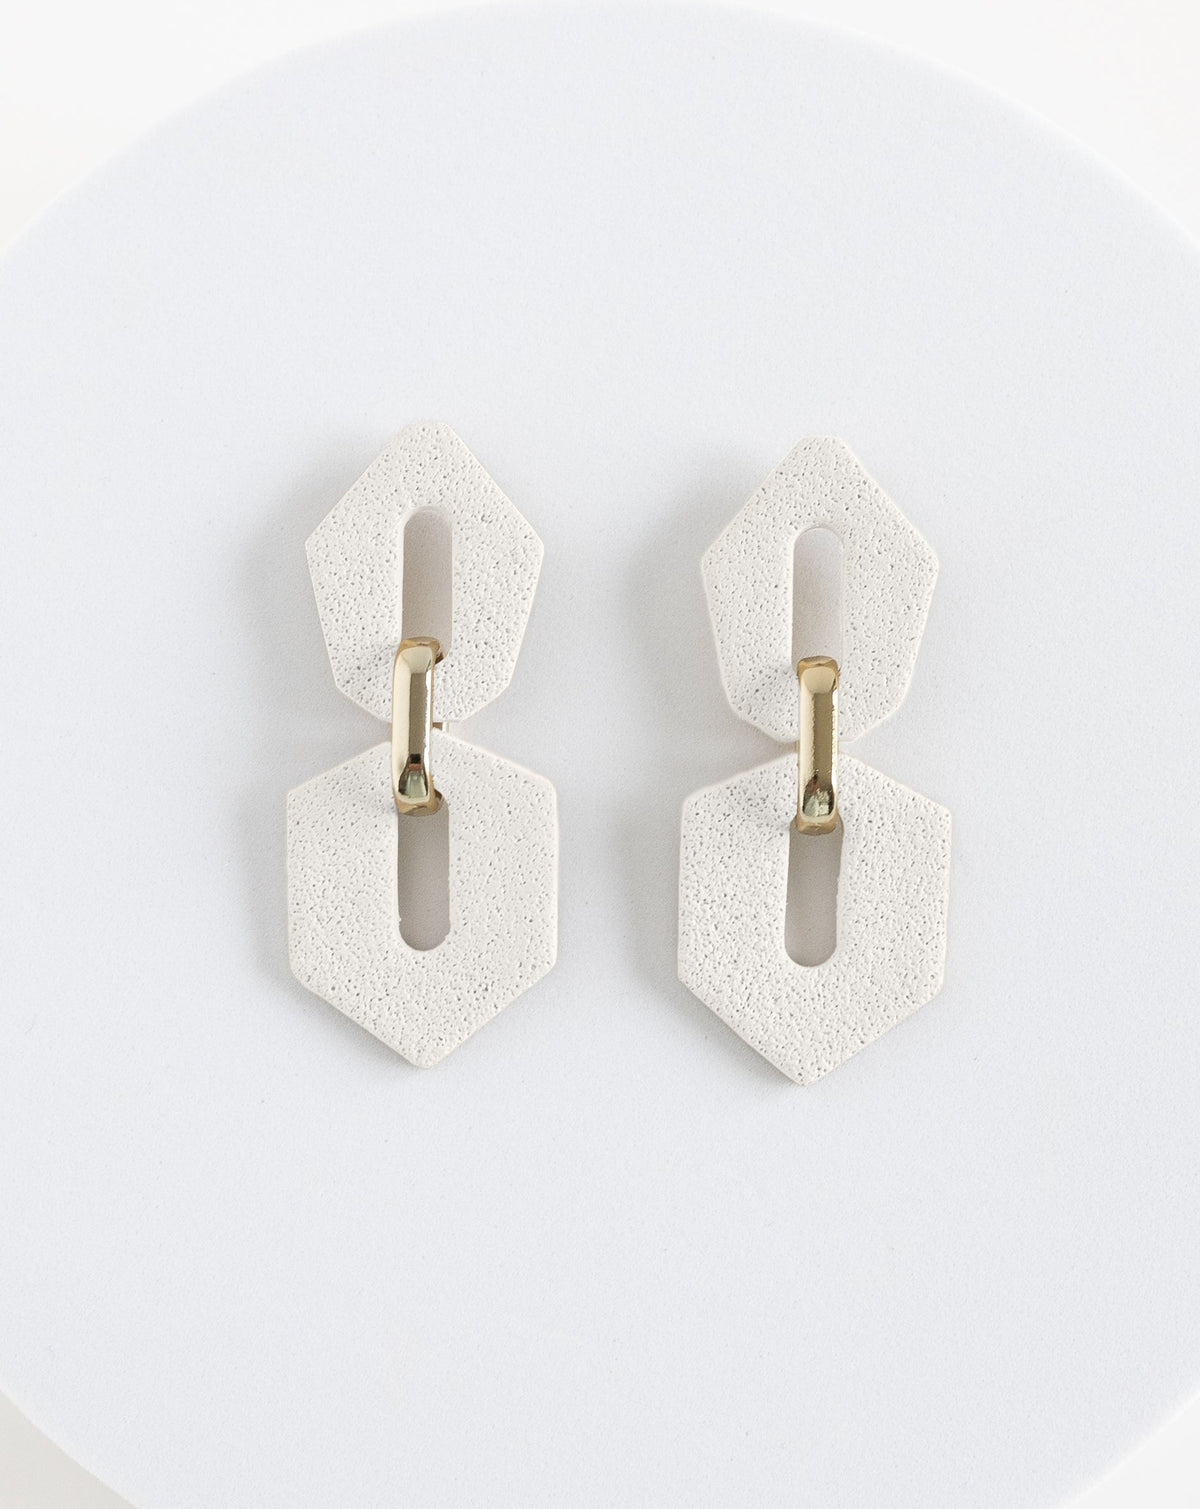 LYHO exclusive design, Shilla earrings in White color.